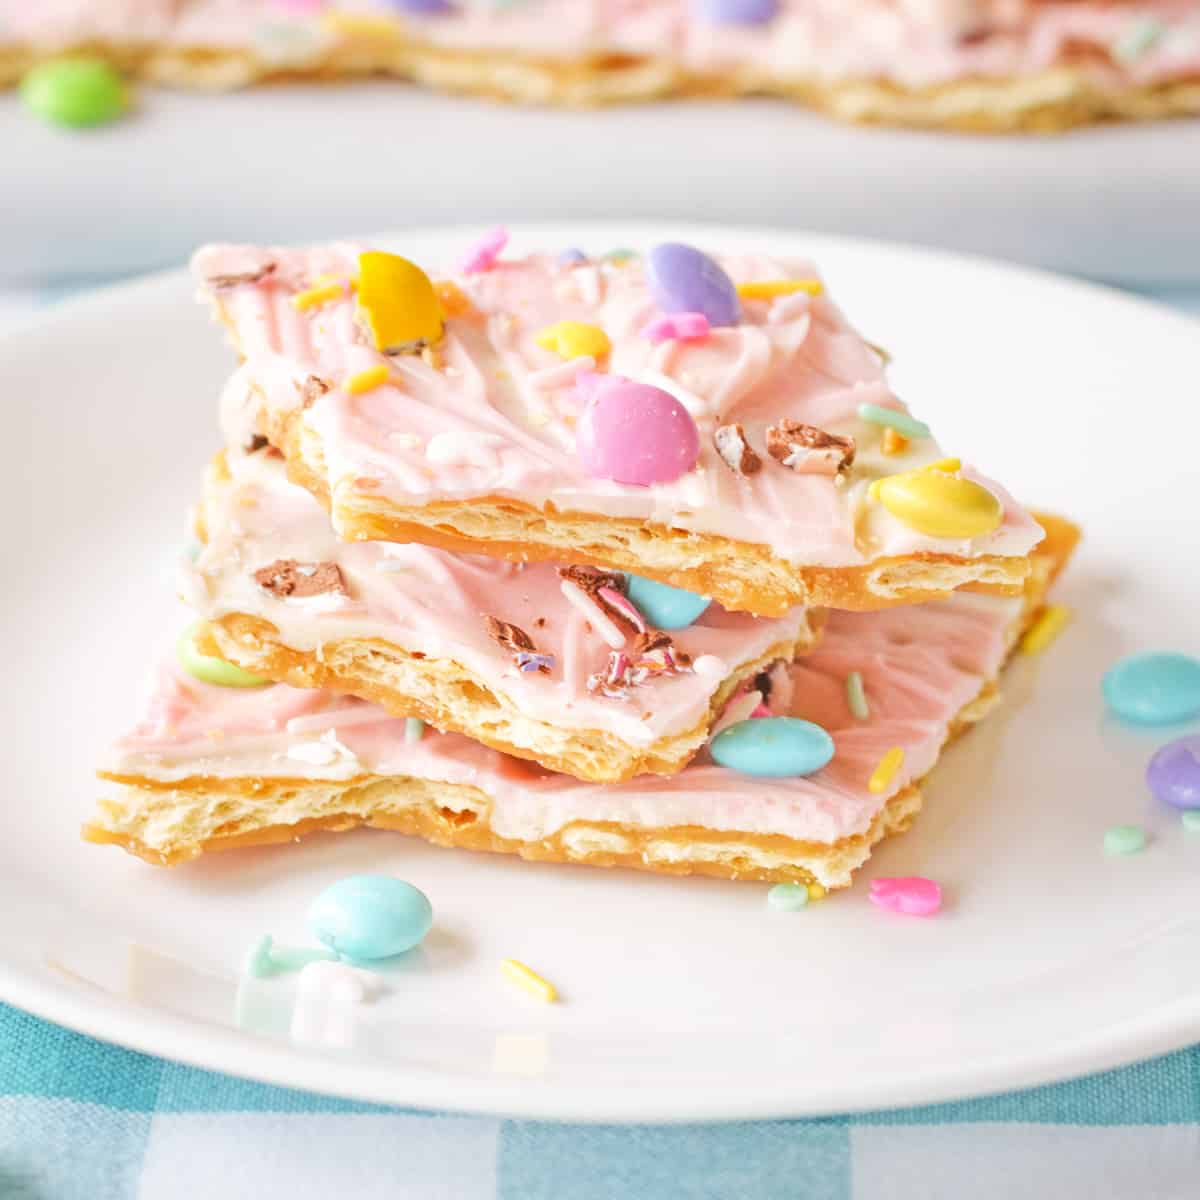 Pink white chocolate Easter bark with pastel M&Ms, Mini Eggs, and sprinkles.